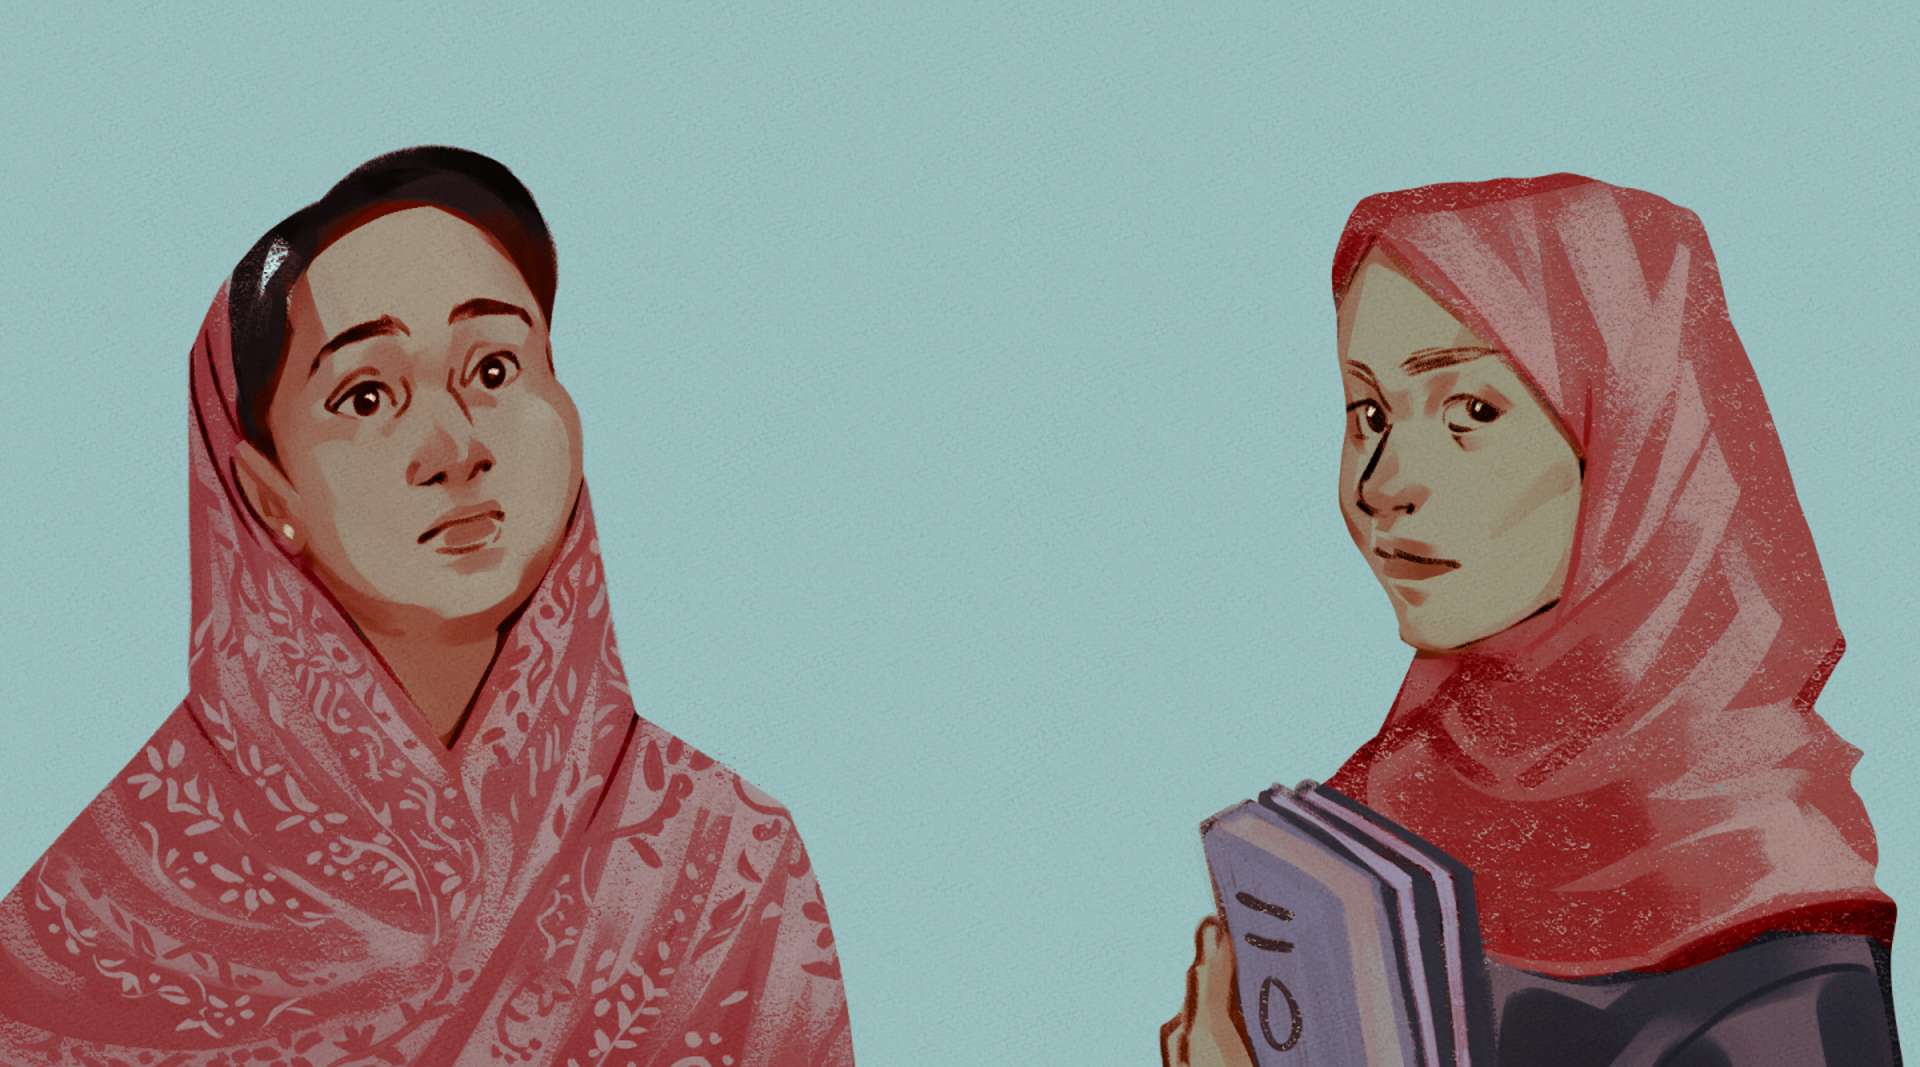 Close up portraits of Romida and Hafsa on a blue background, Hafsa holding a stack of books